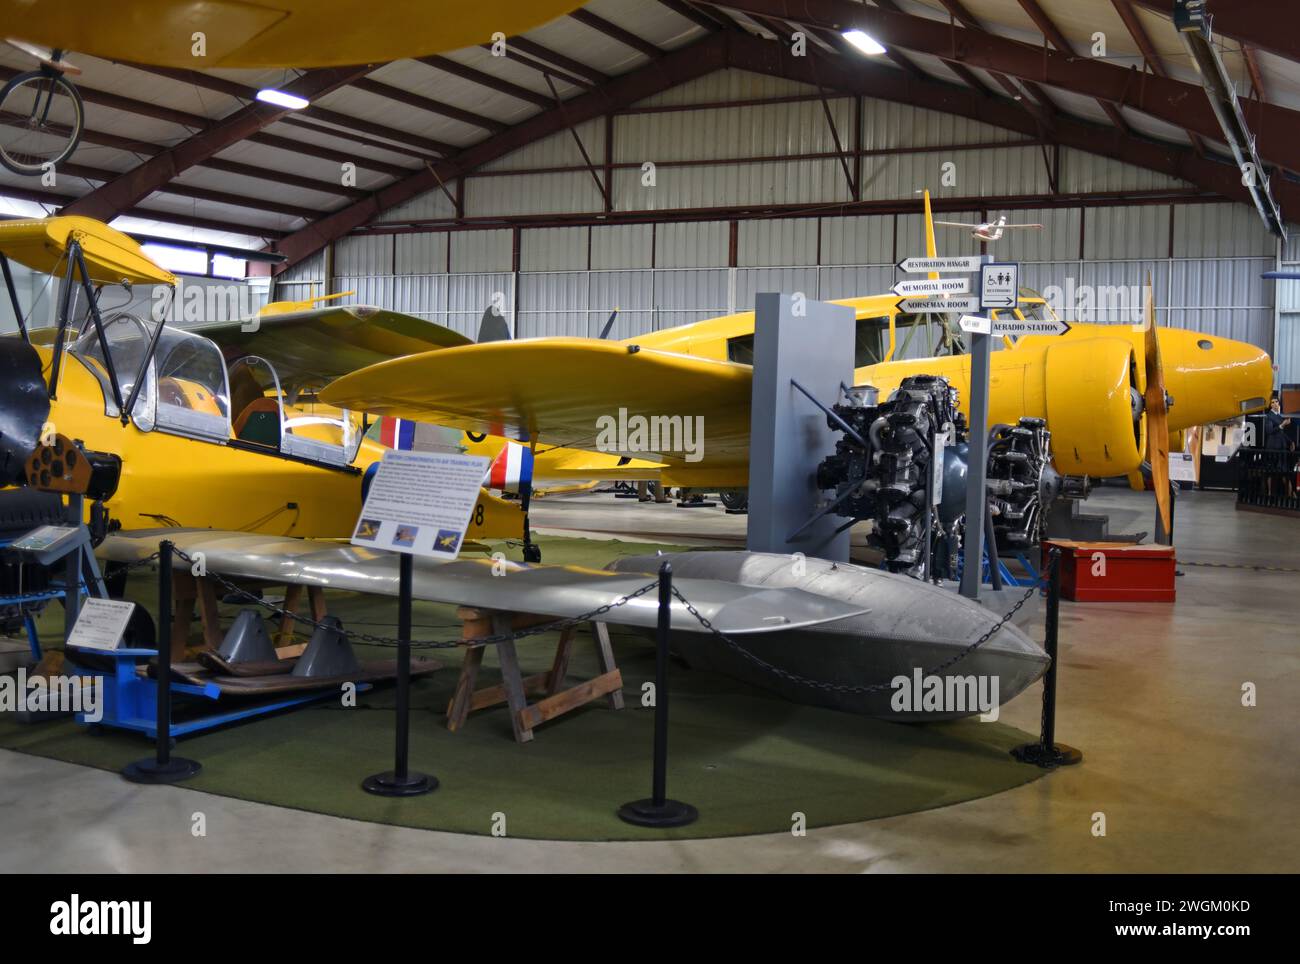 Vintage aircraft on display at the British Columbia Aviation Museum in Sidney, British Columbia Stock Photo